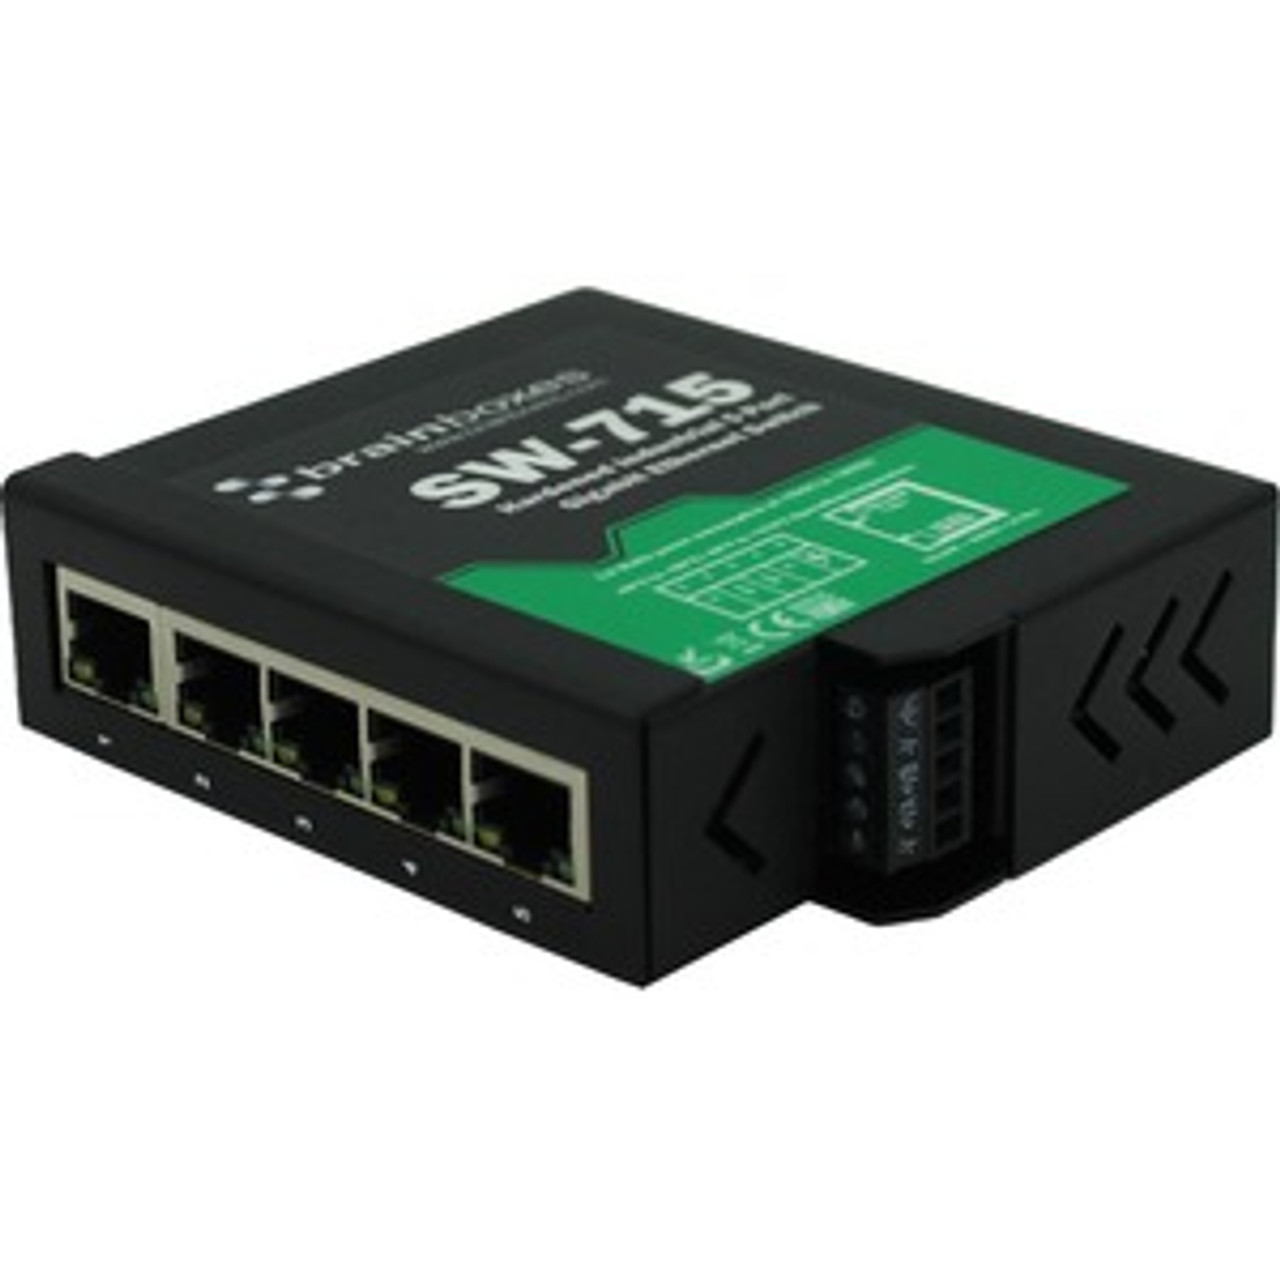 SW-715 Brainboxes Hardened Industrial 5 Port Gigabit Ethernet Switch DIN Rail Mountable - 5 Ports - TAA Compliant - 2 Layer Supported - Twisted Pair - DIN